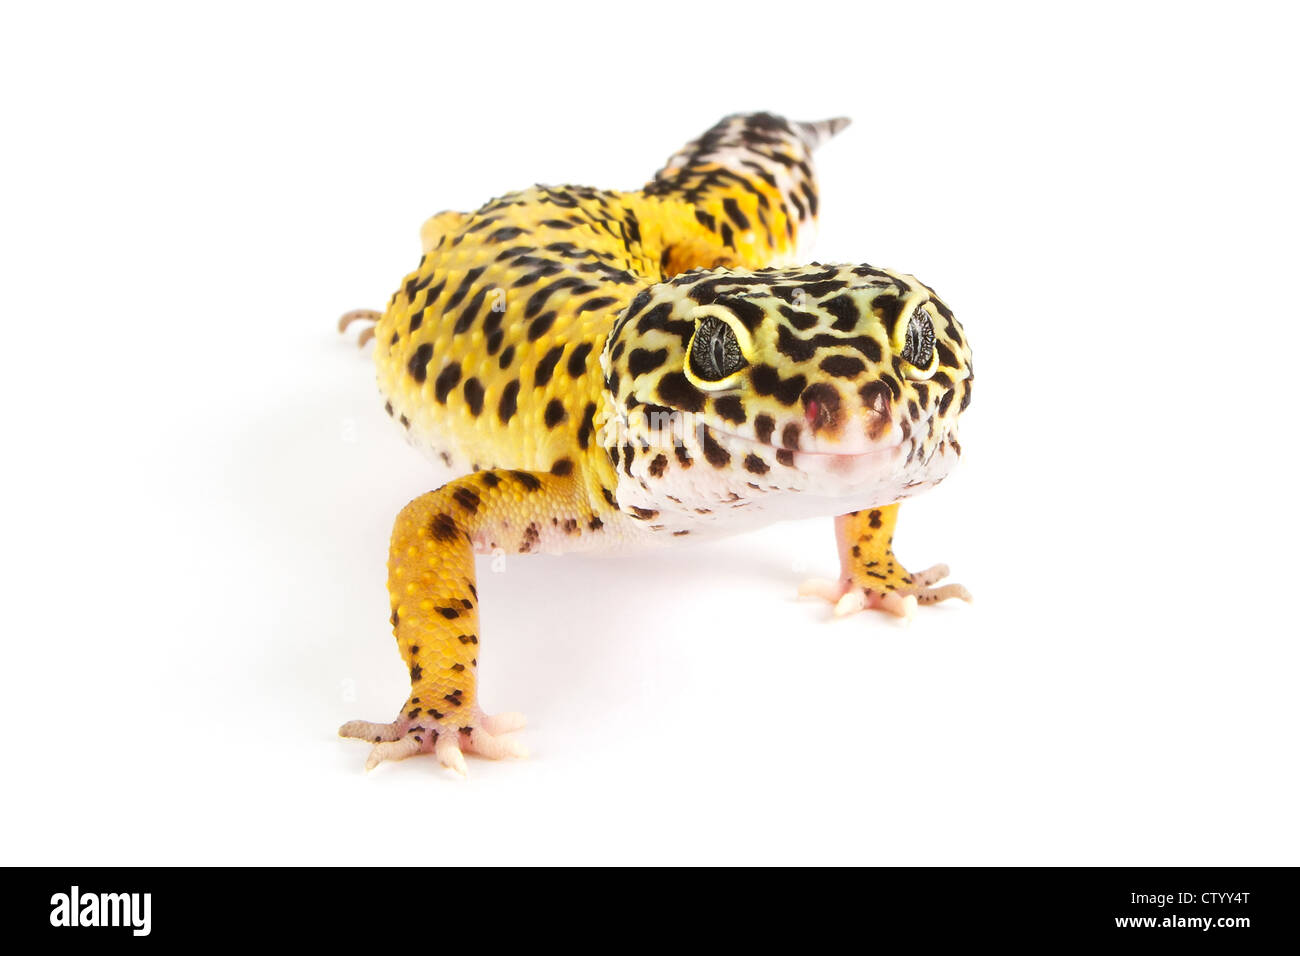 Normal Leopard gecko morph on a white background Stock Photo